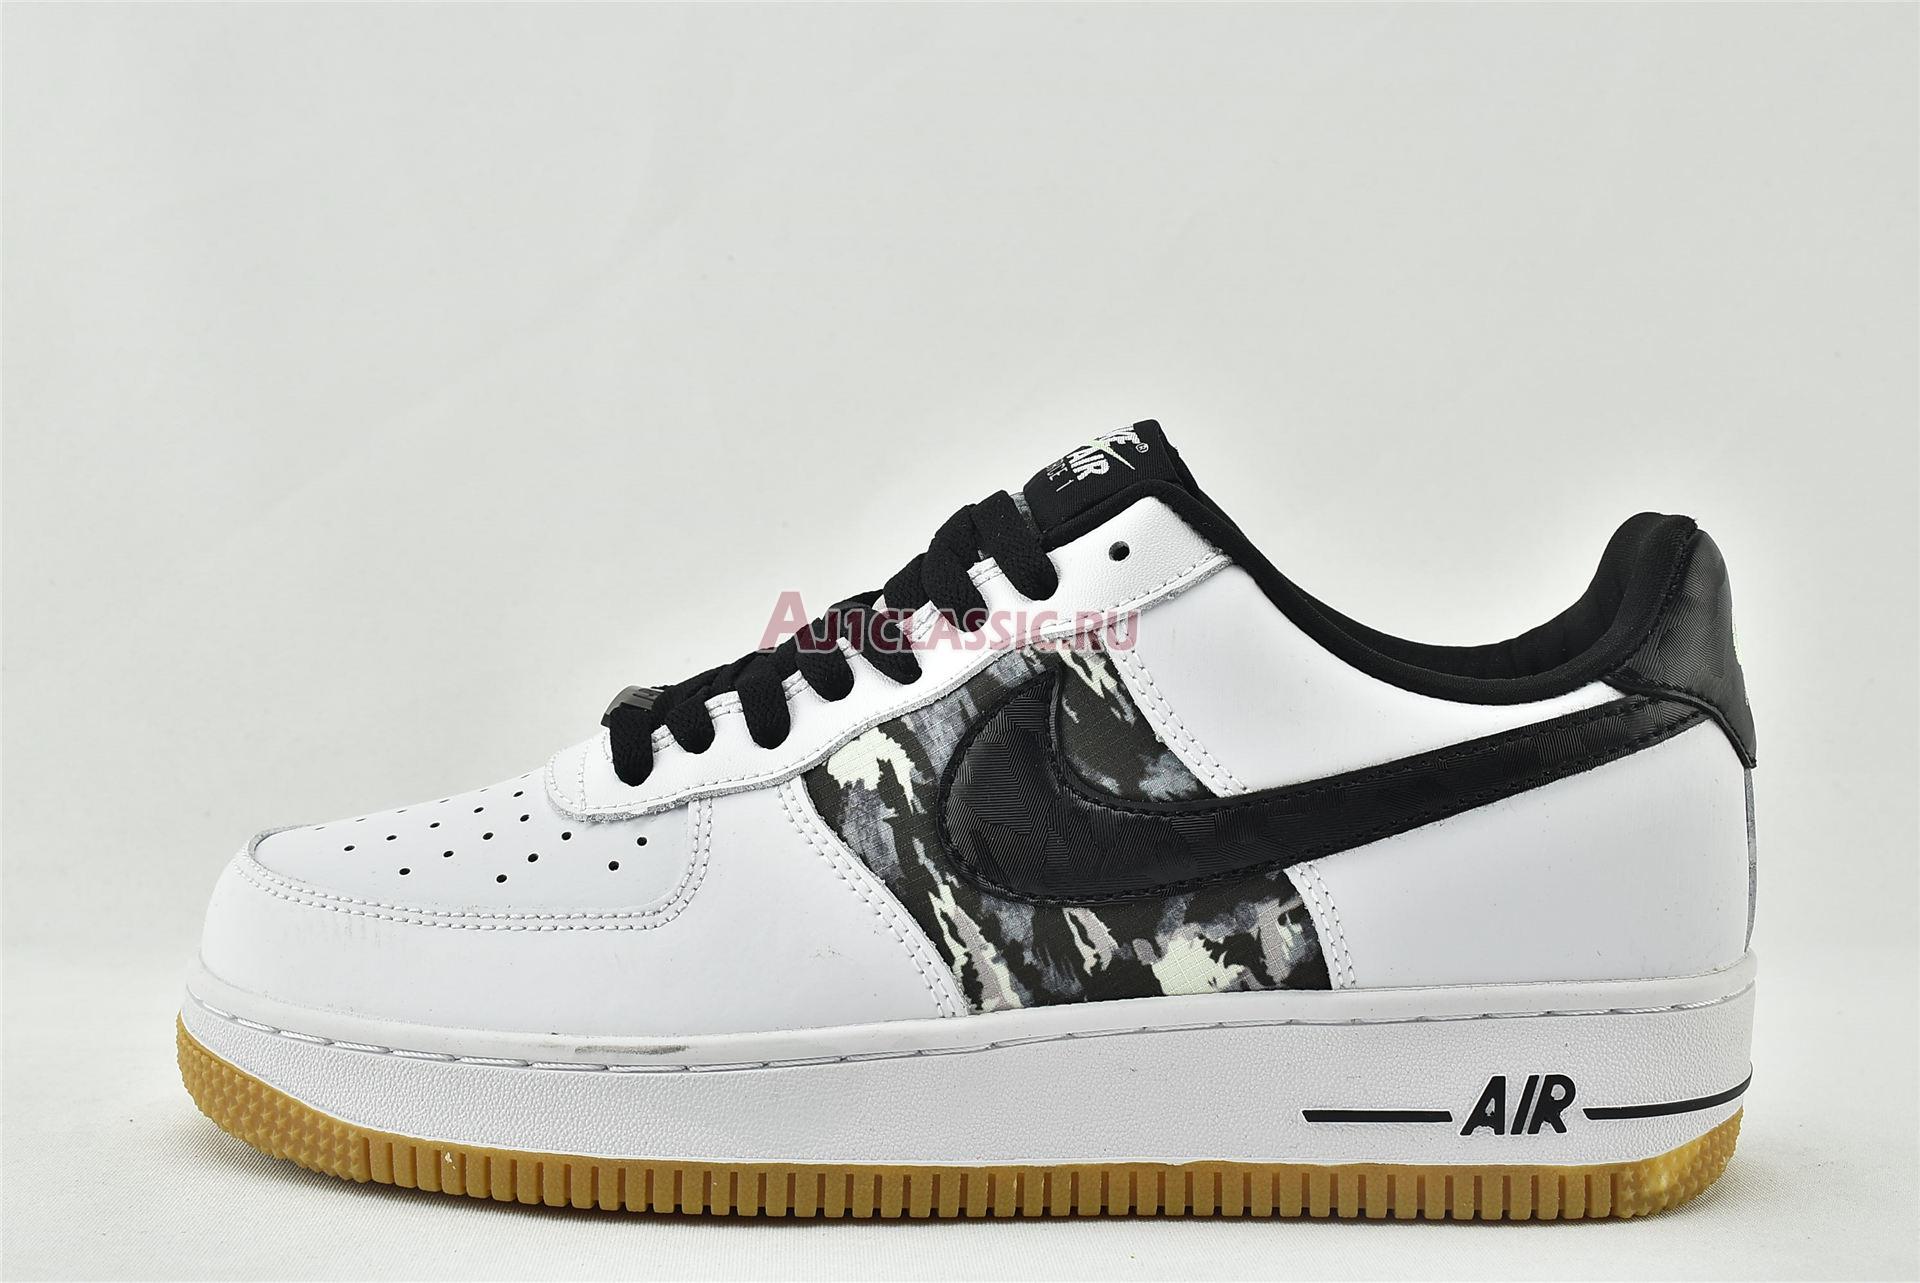 Nike Air Force 1 07 LV8 "Pacific Northwest Camo" CZ7891-100